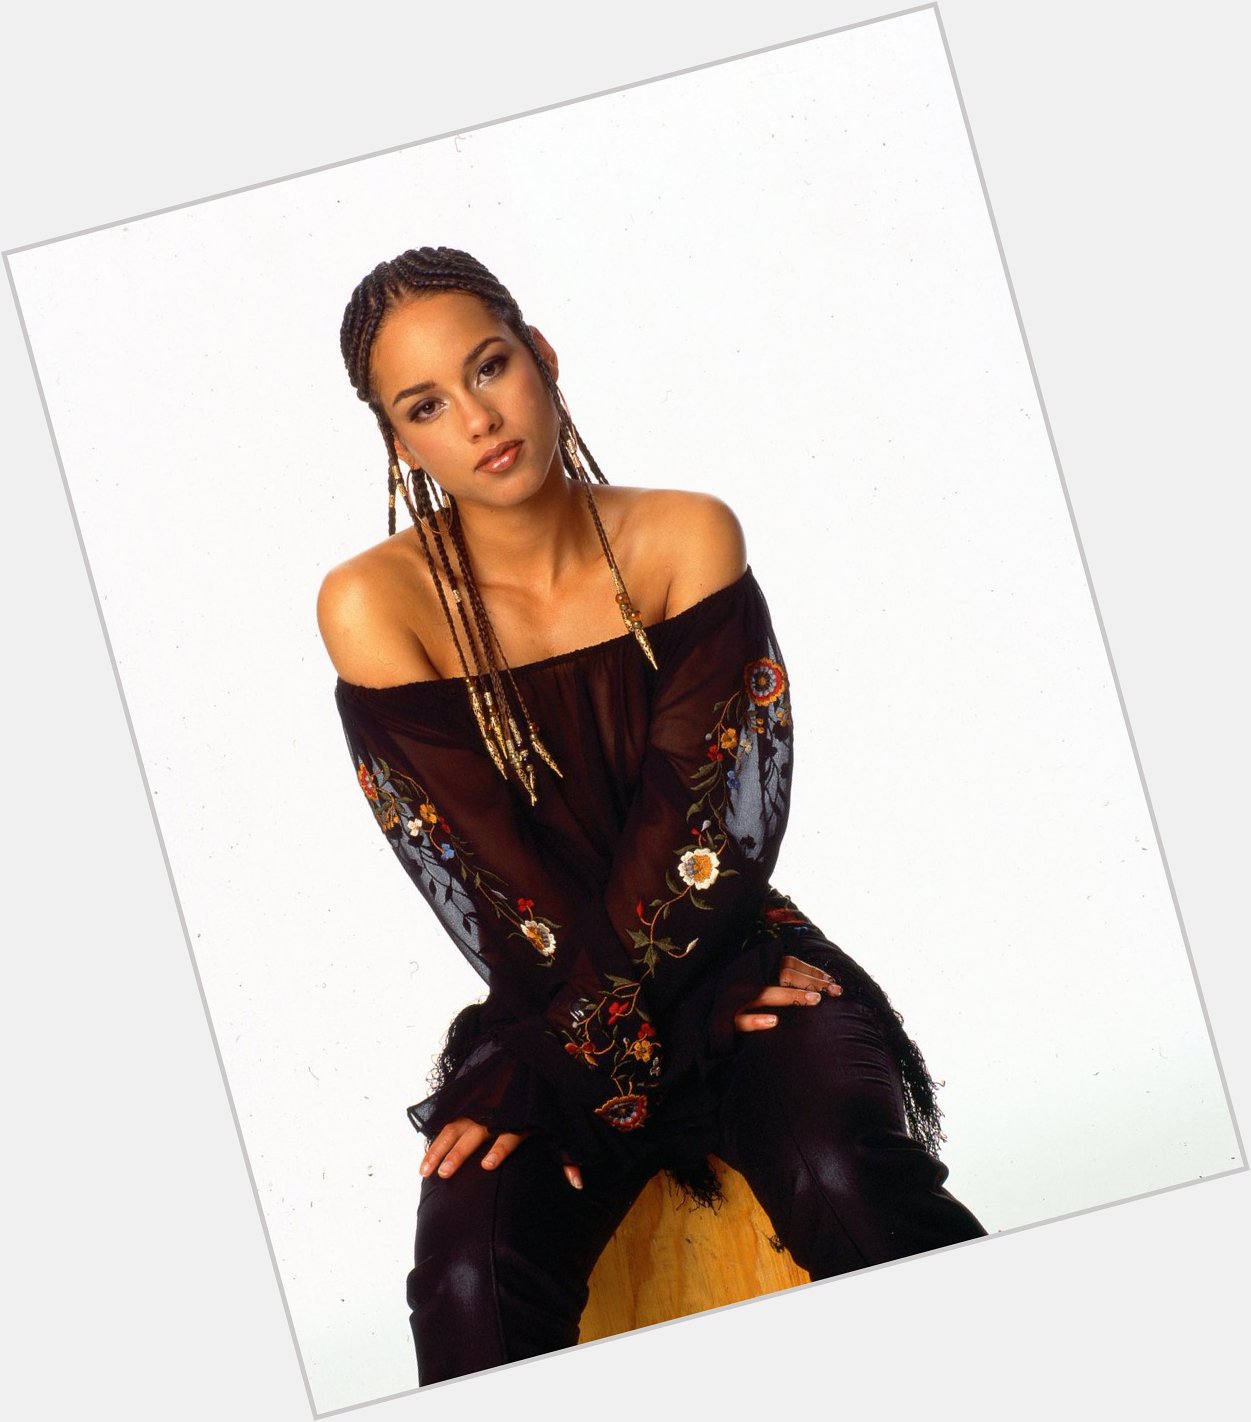 One of my favourite performers Alicia Keys turns 42 today. Happy Birthday.   